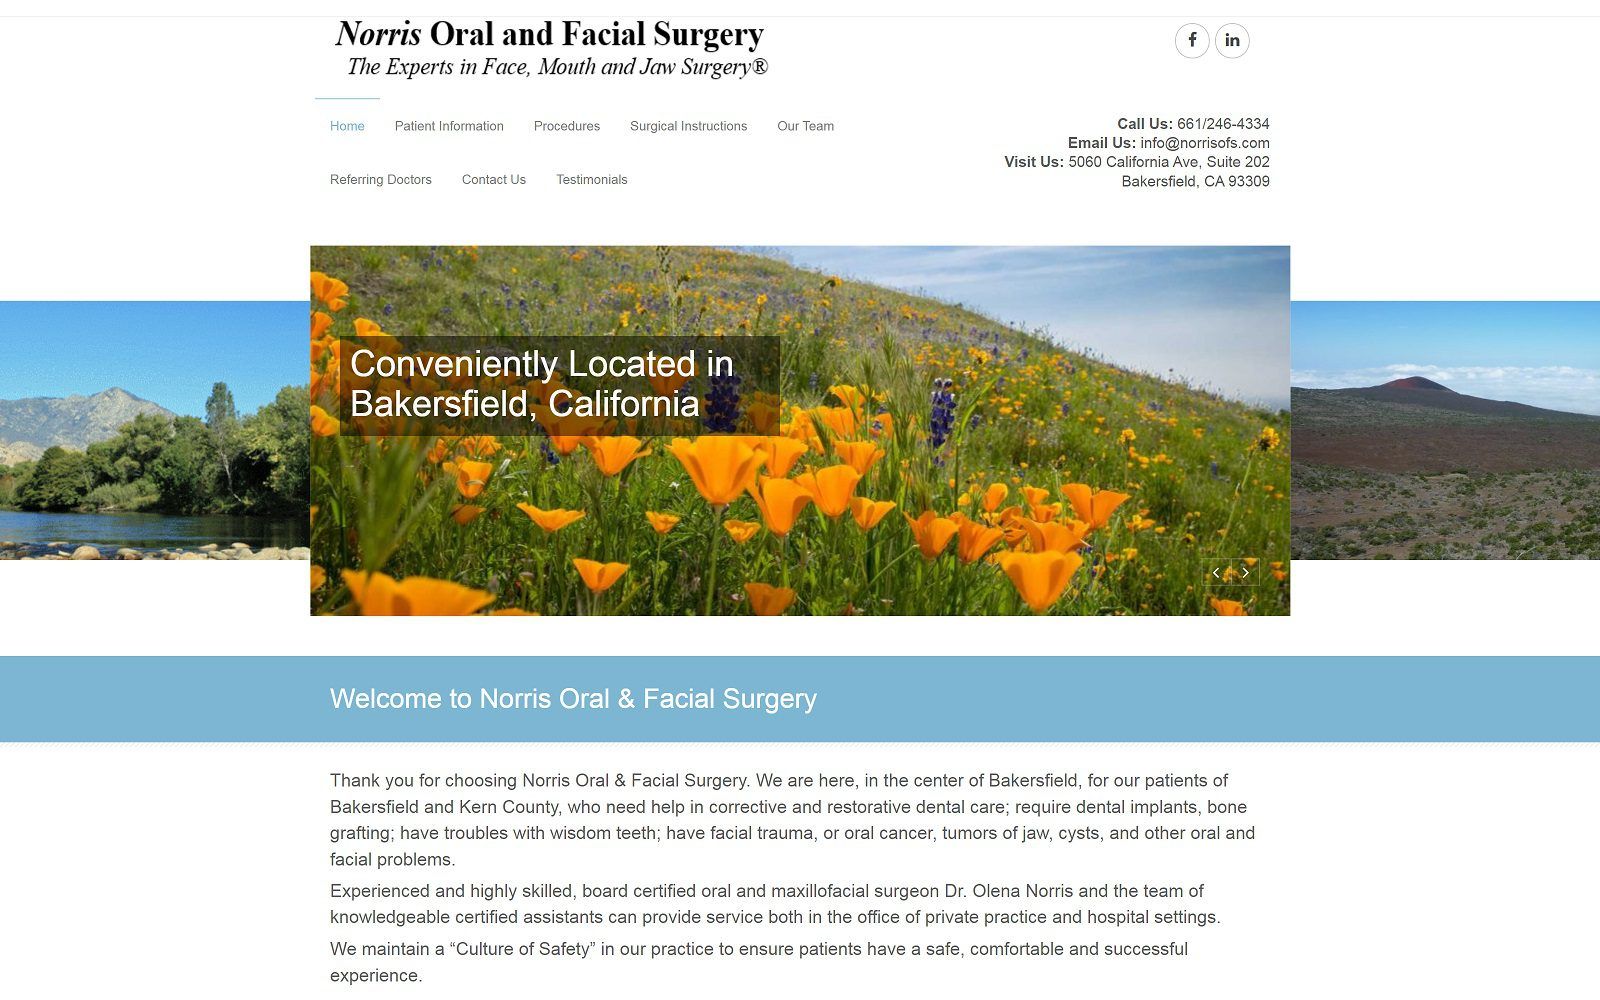 The screenshot of norris oral and facial surgery website